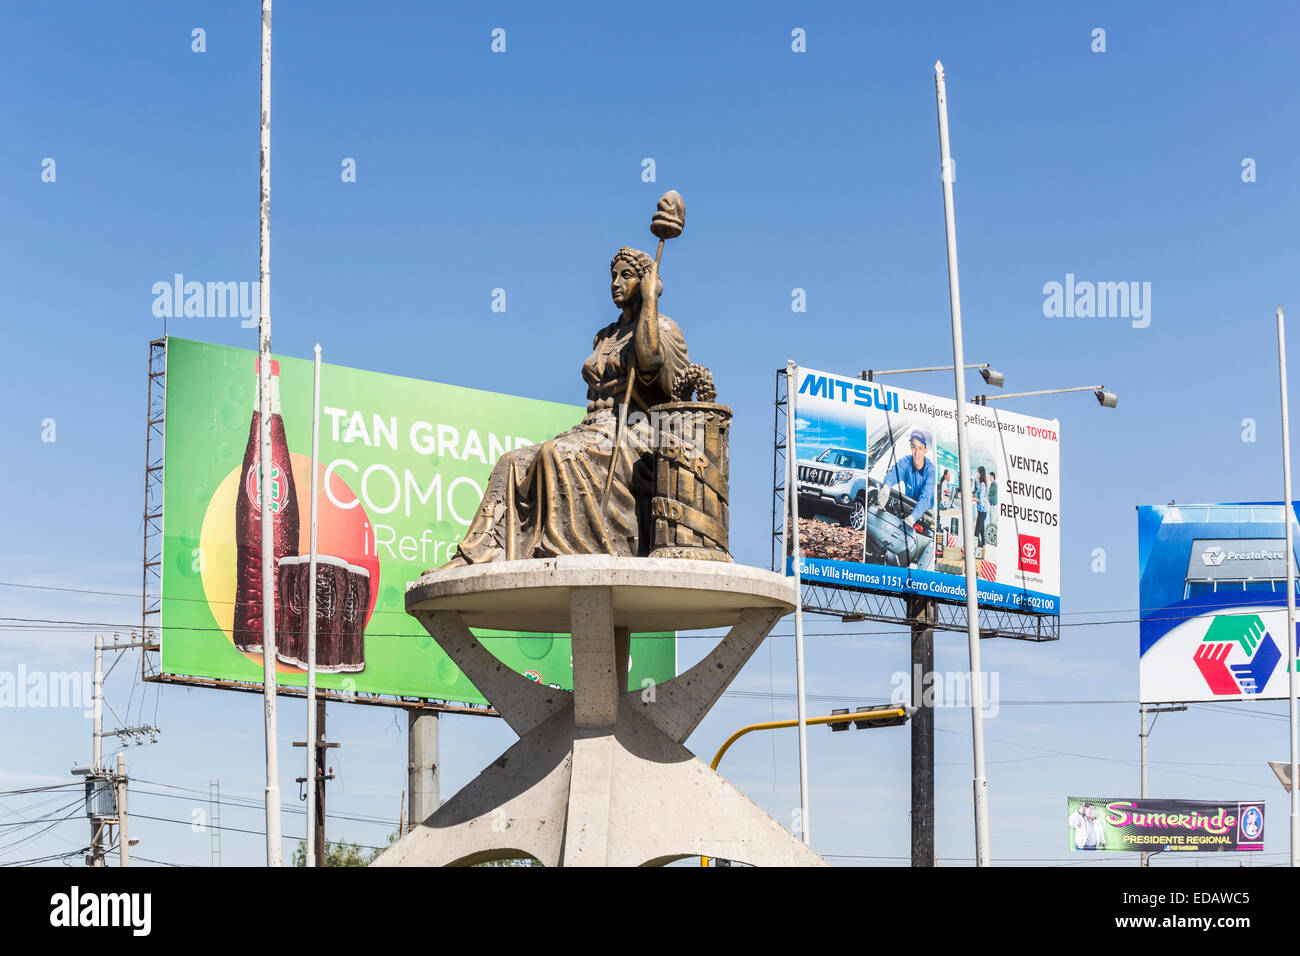 Roadside statue of a seated woman in Arequipa at the beginning of the Colca Canyon, Peru, in the middle of the road in front of advertising billboards Stock Photo